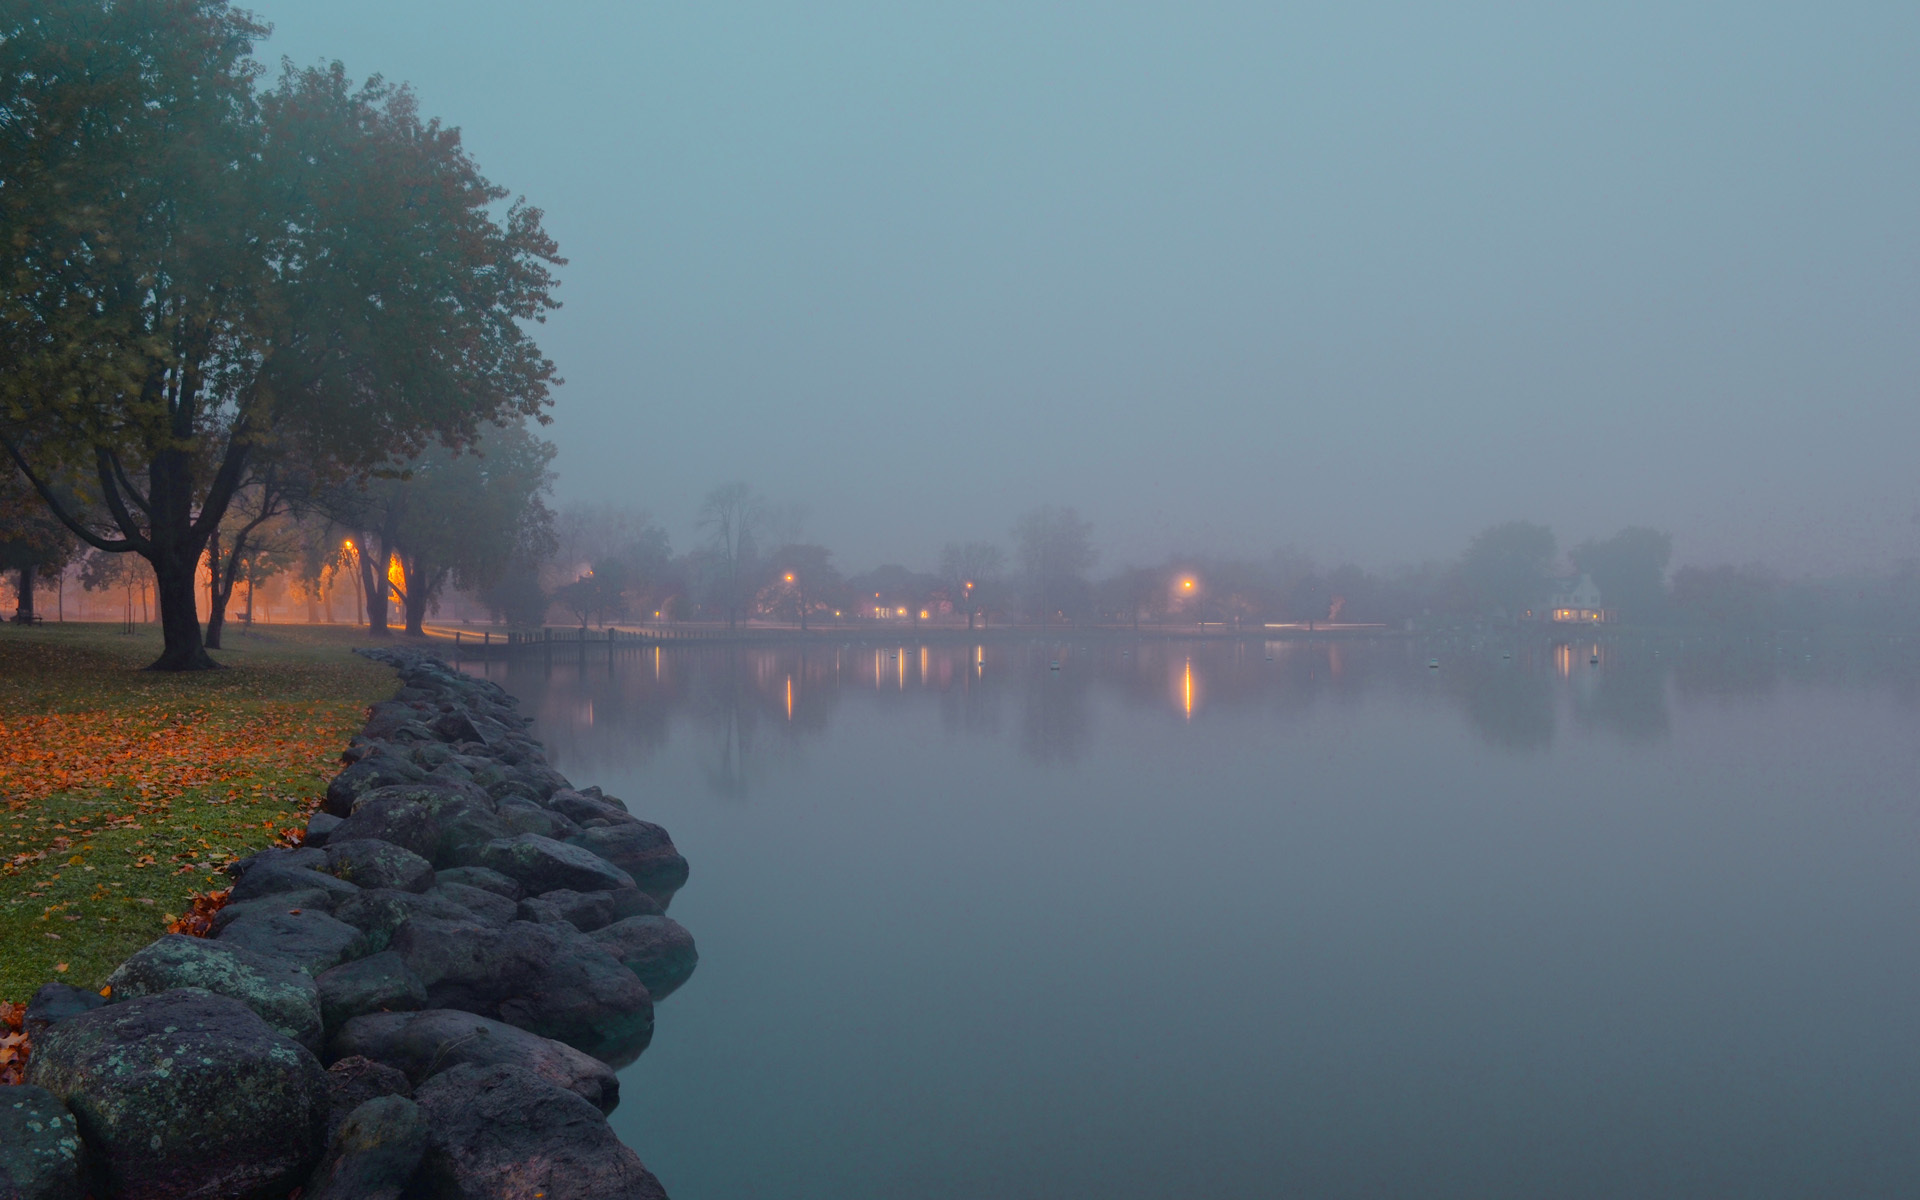 lakes, Water, Reflection, Fog, Mist, Stone, Rock, Houses, Architecture, Buildingd, Lights, Trees, Park, Autumn, Fall, Leaves Wallpaper